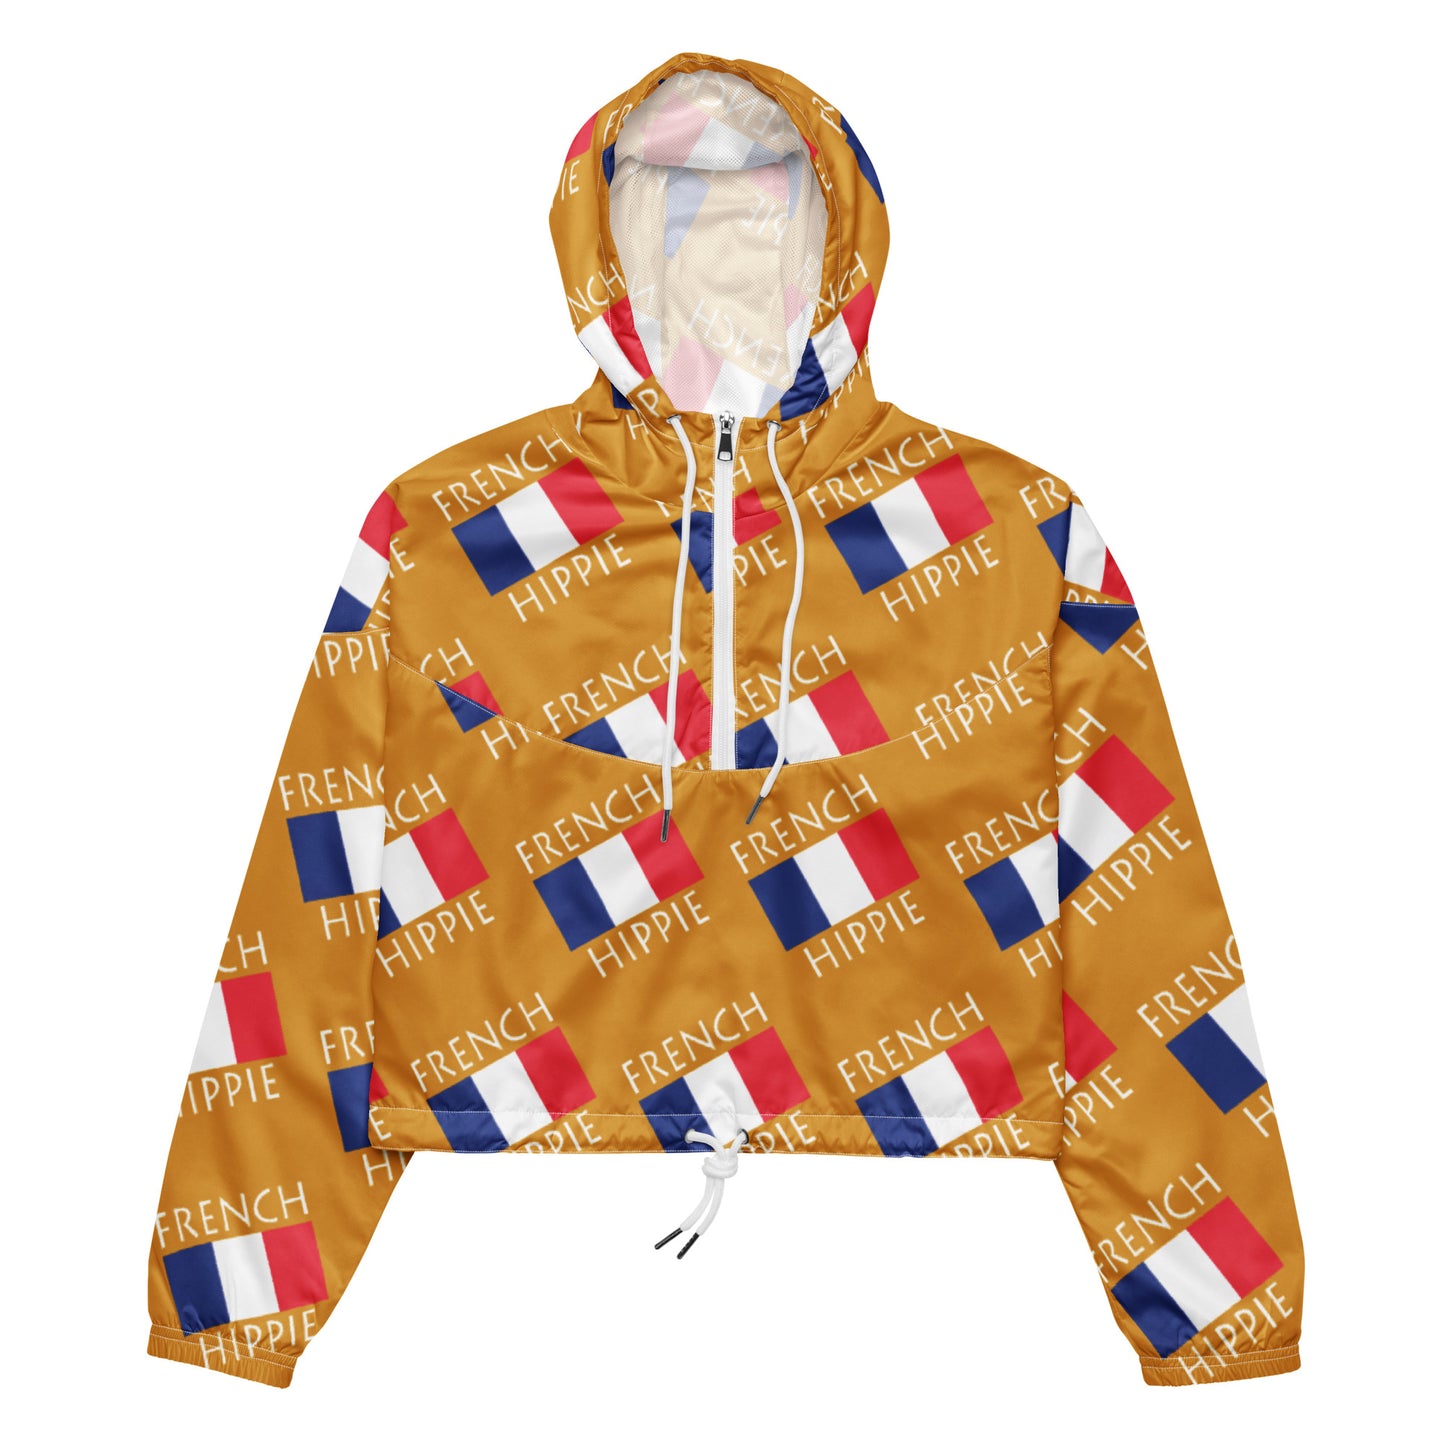 Your French Flag Hippie Stylish cropped windbreaker half-zip jacket is a fashion statement! Hiking or hanging out it is super functional while making you look beautiful. Features include side-slit pockets, breathable mesh lining, and adjustable draw cords on the hood and waist to support all your stylish outdoor looks.